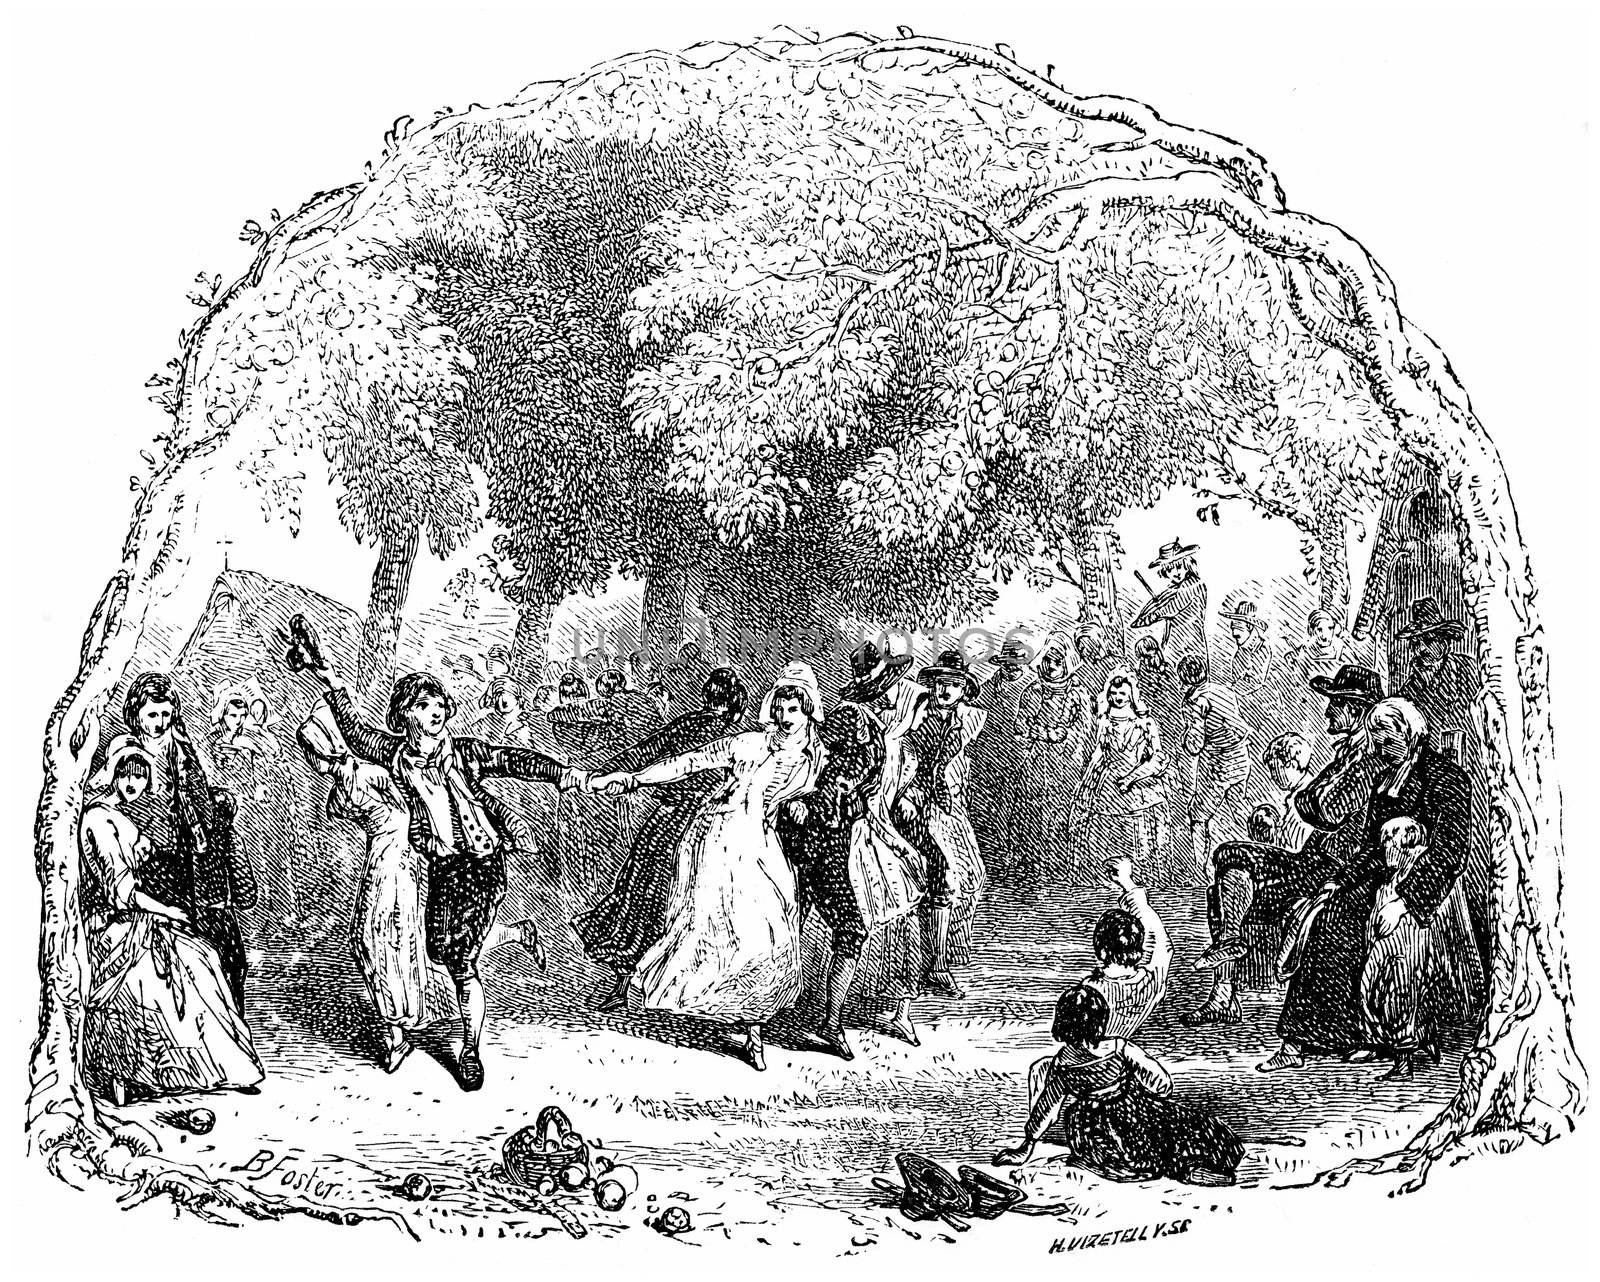 Dance, vintage engraved illustration. From Chemin des Ecoliers, 1861.
